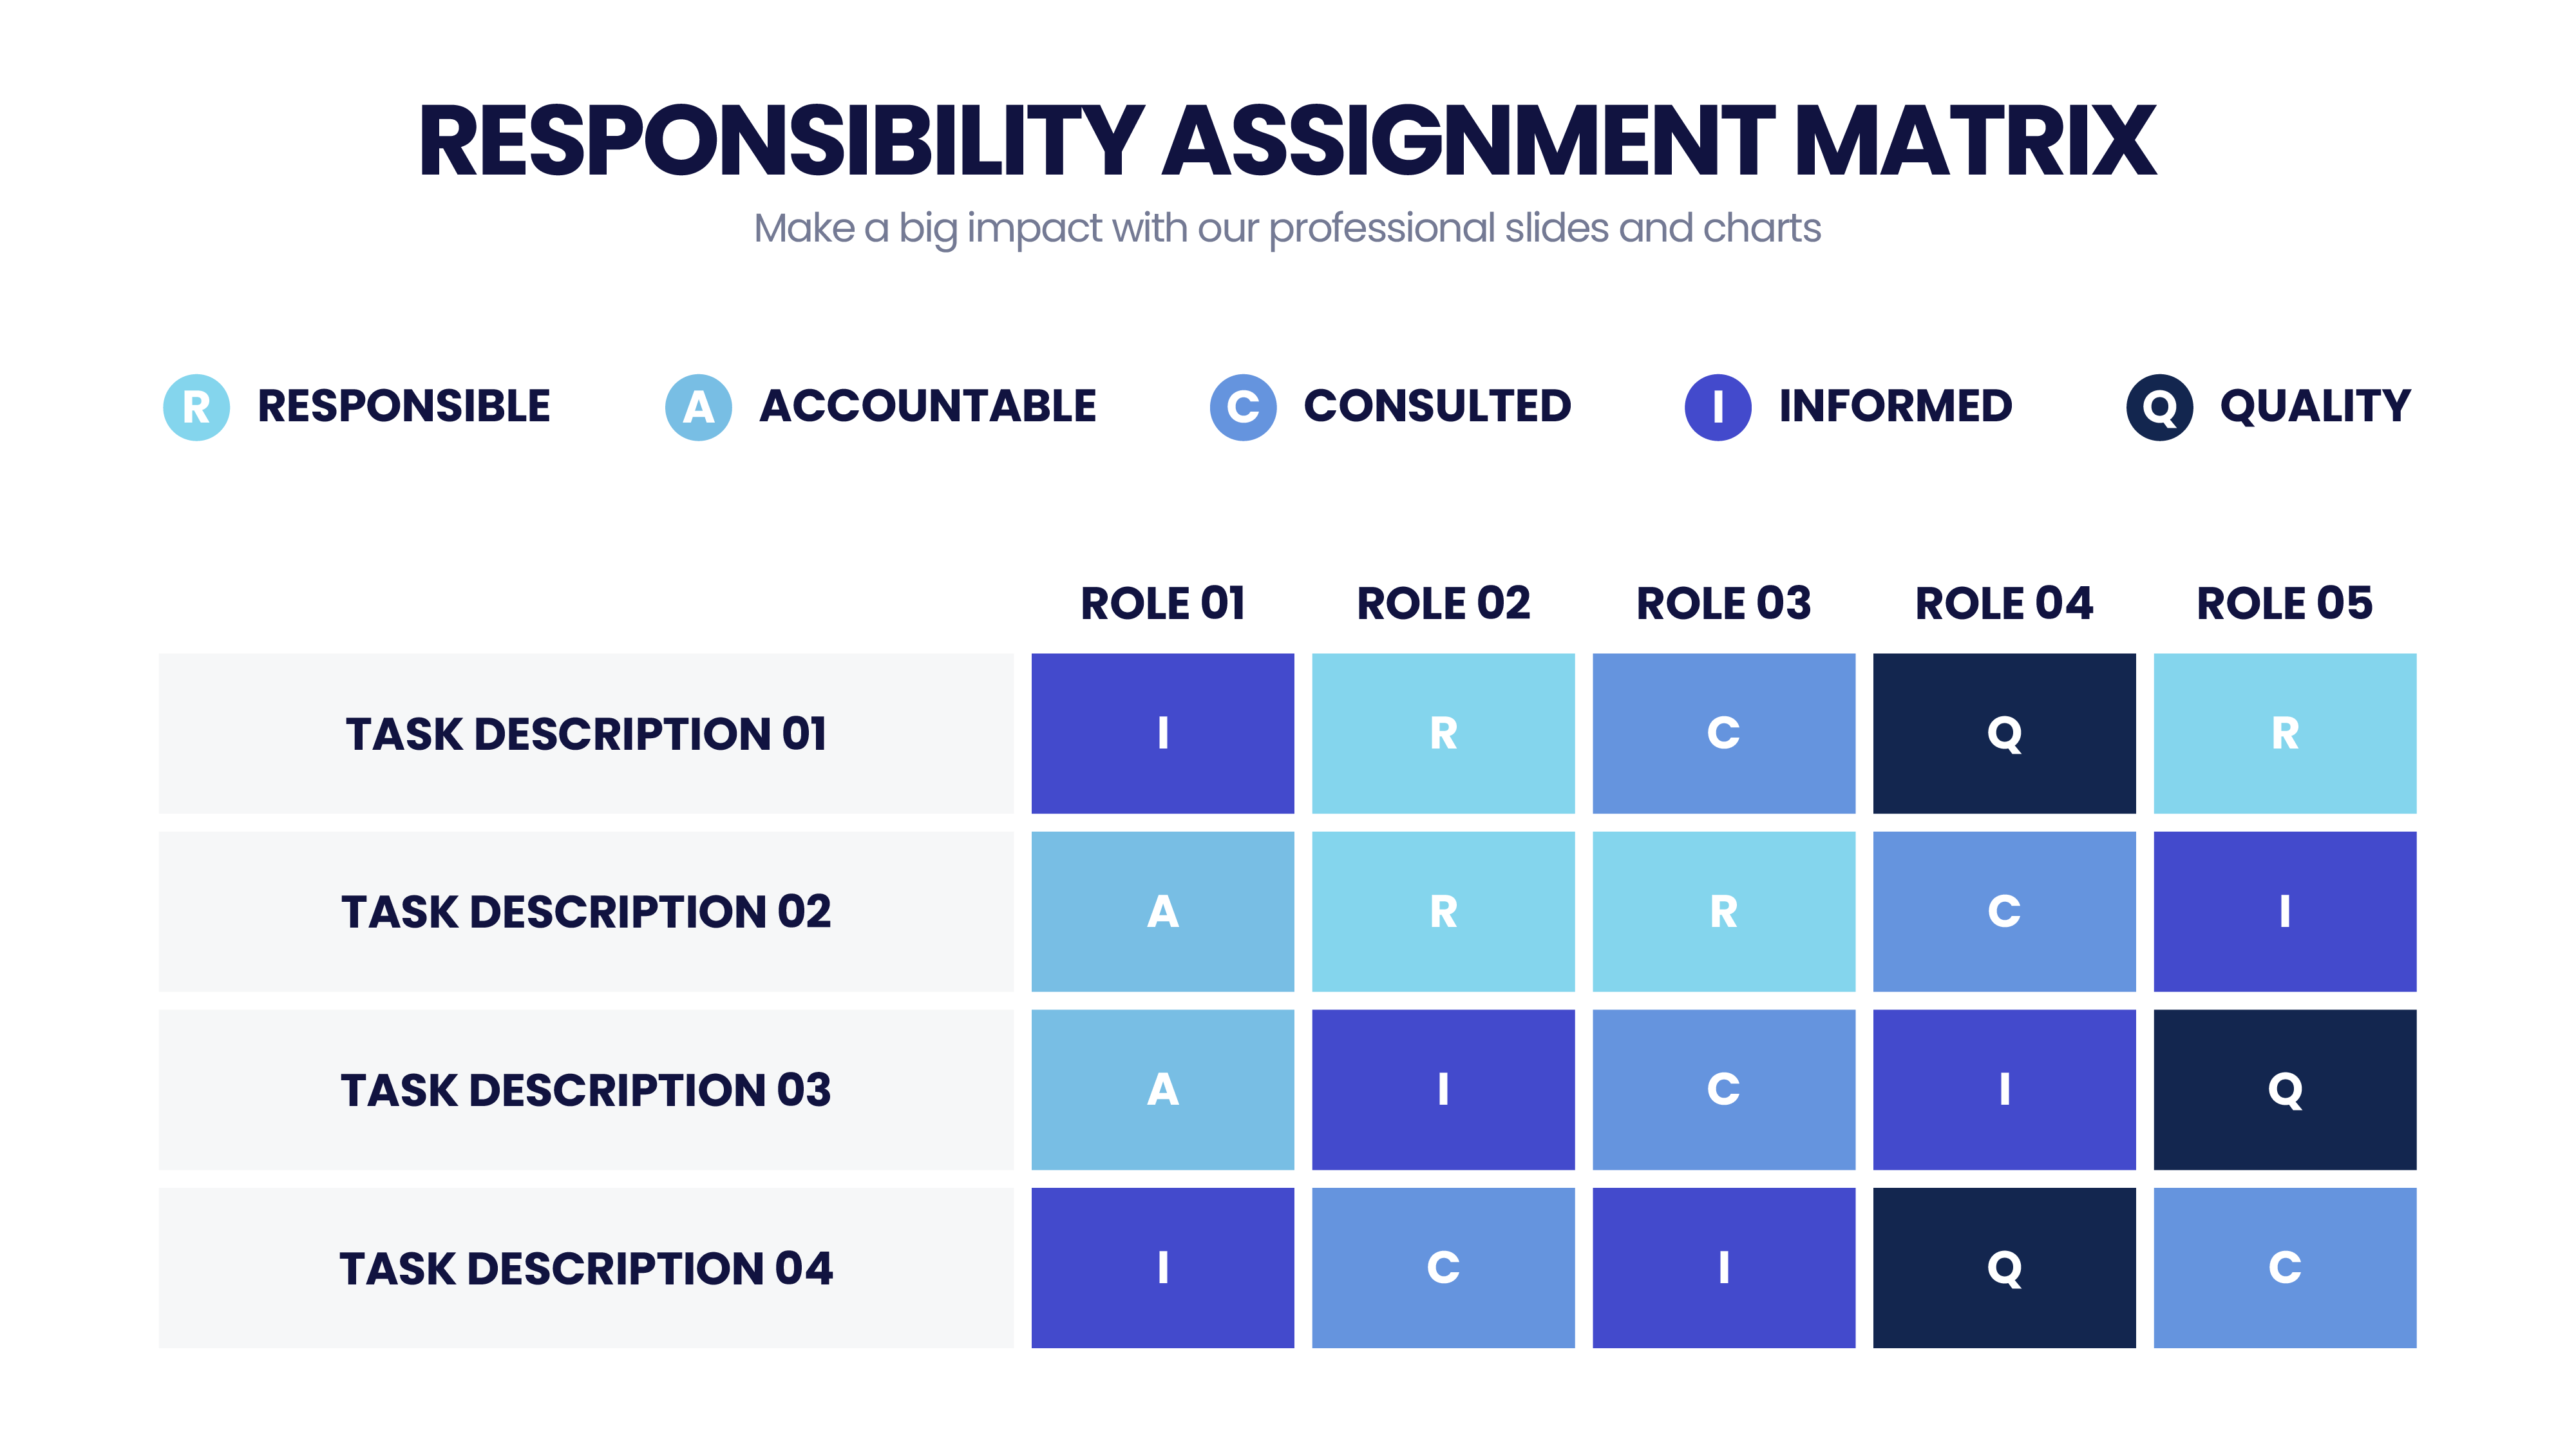 responsibility assignment matrix is defined as